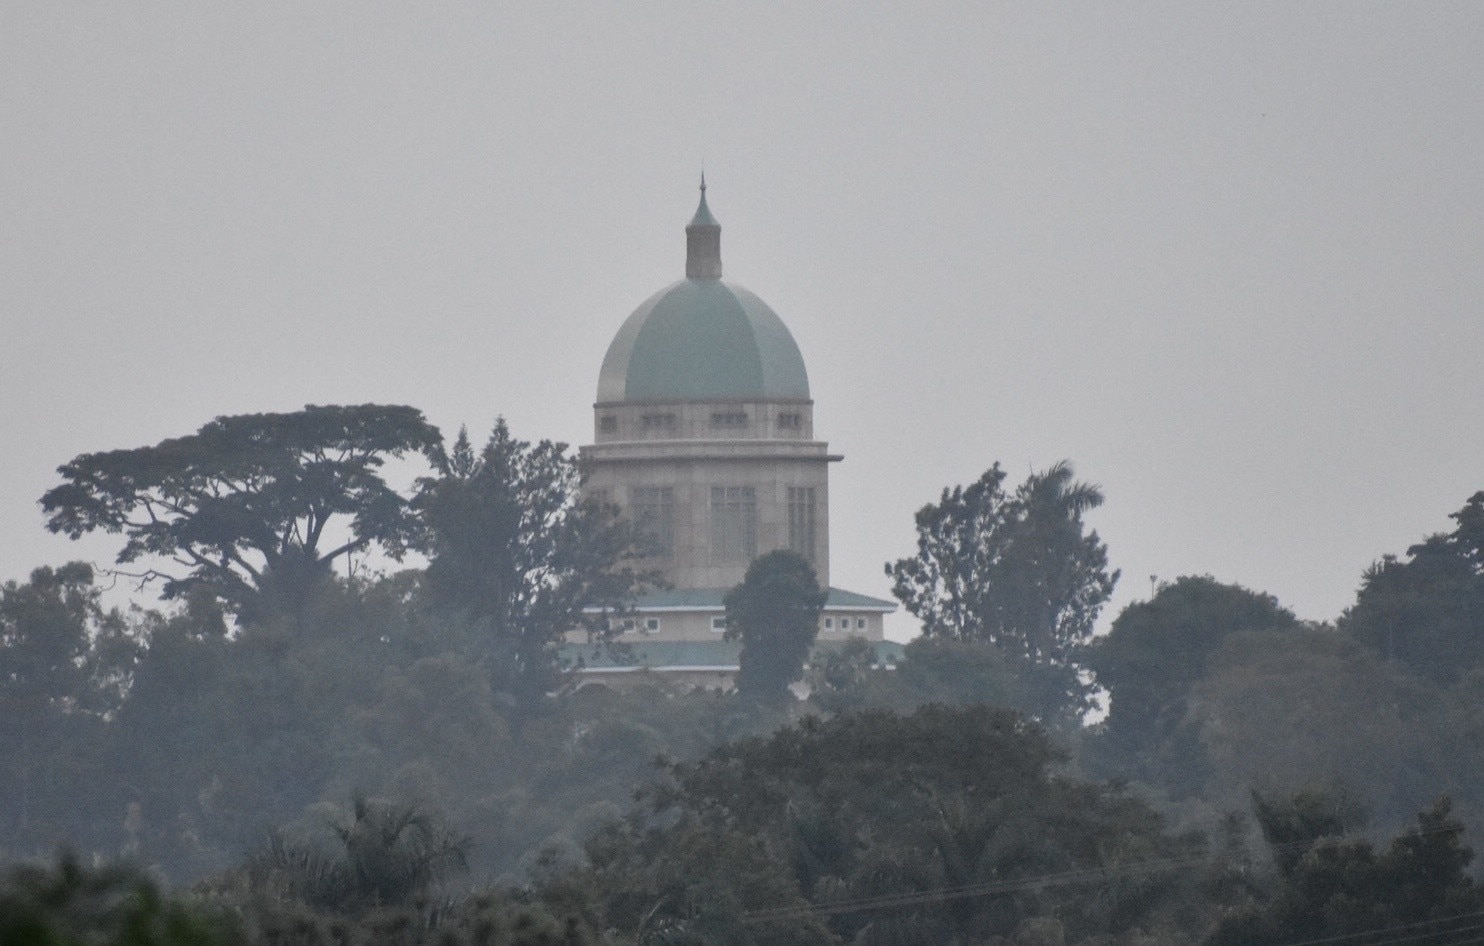 View of the Baha’i Temple in Kampala from the Ndere Cultural Center